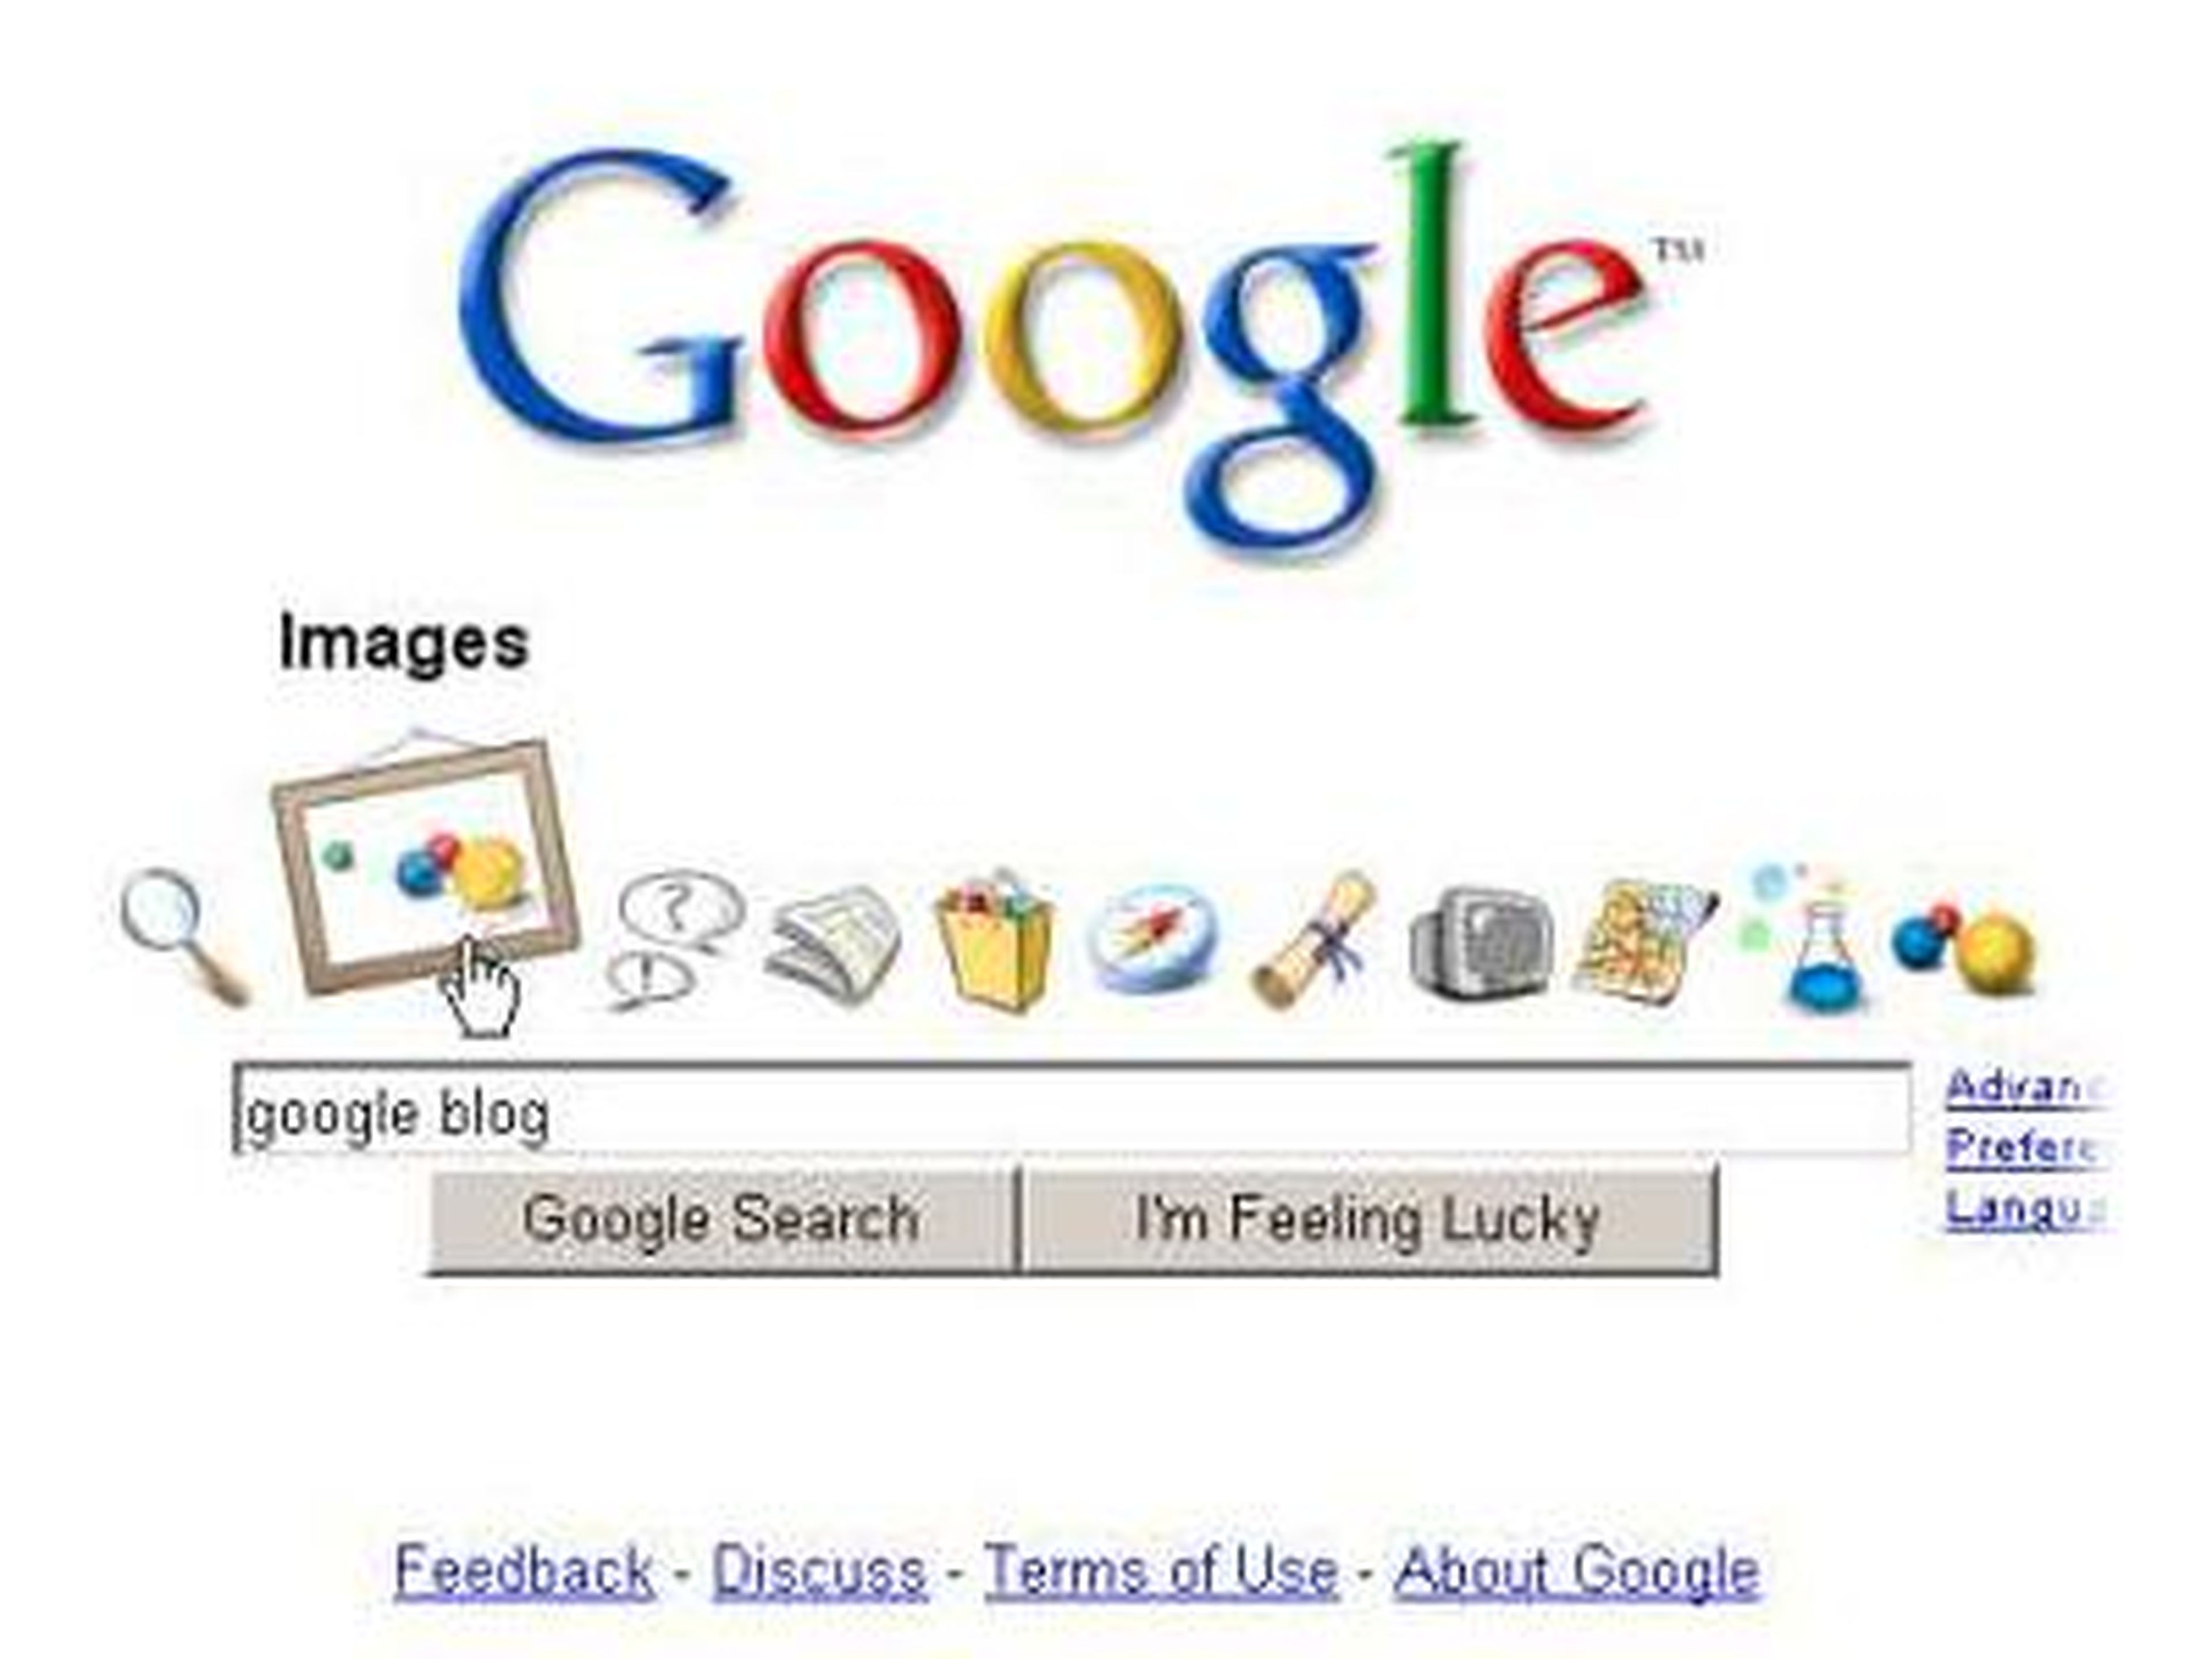 Google X, an alternative interface for the search engine, lasted exactly one day before Google pulled the plug. A strange tribute to Mac OS X's dock, the site said: "Roses are red. Violets are blue. OS X rocks. Homage to you."